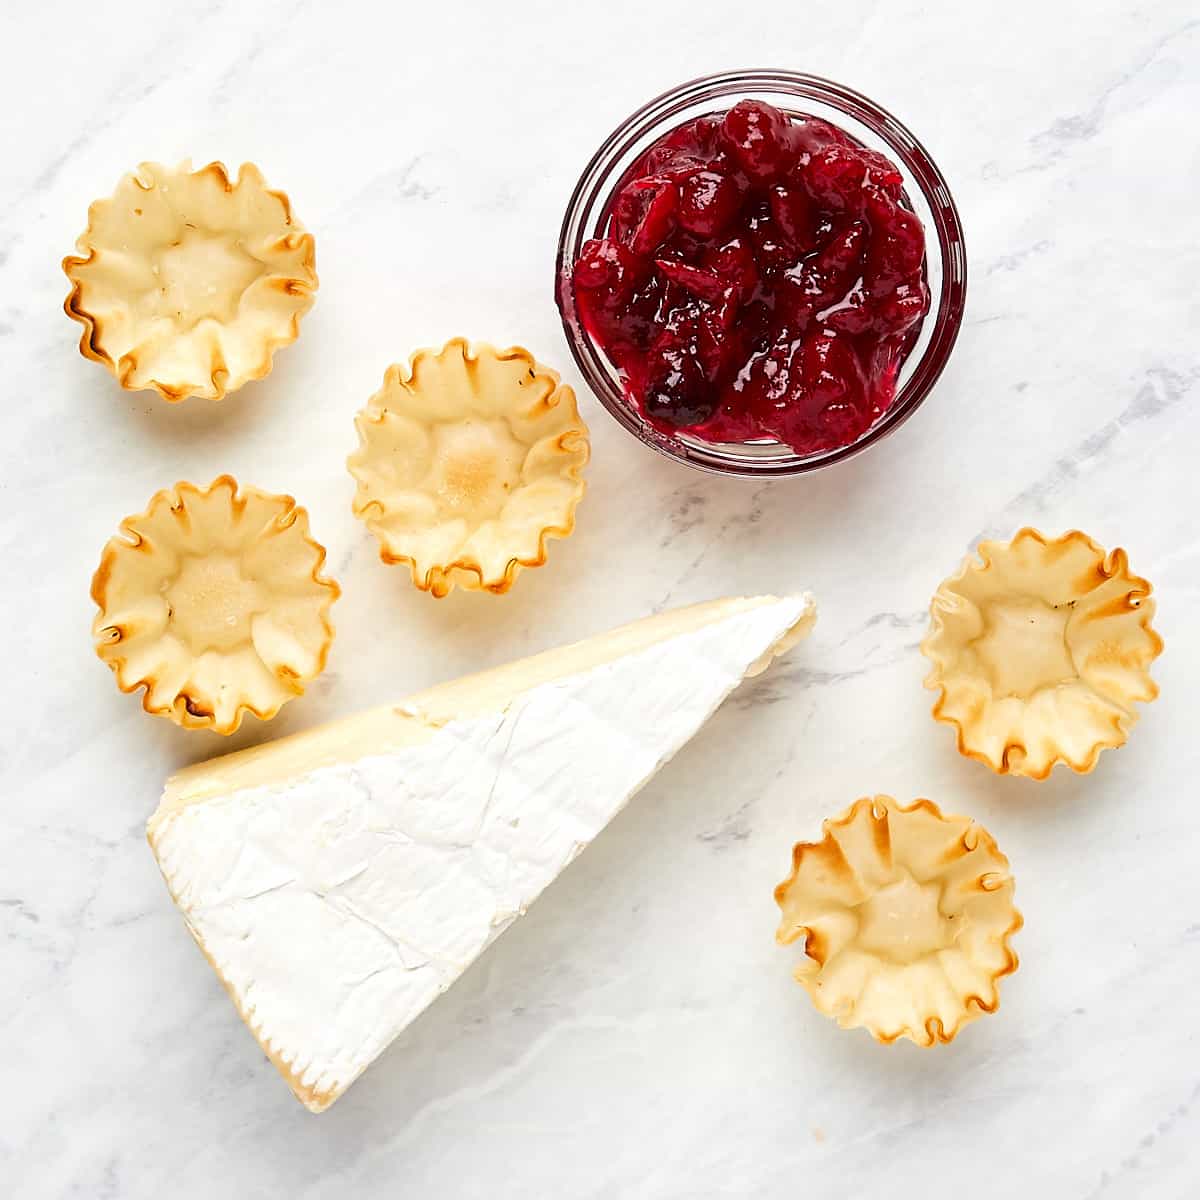 ingredients - brie, phyllo cups, and cranberry suace